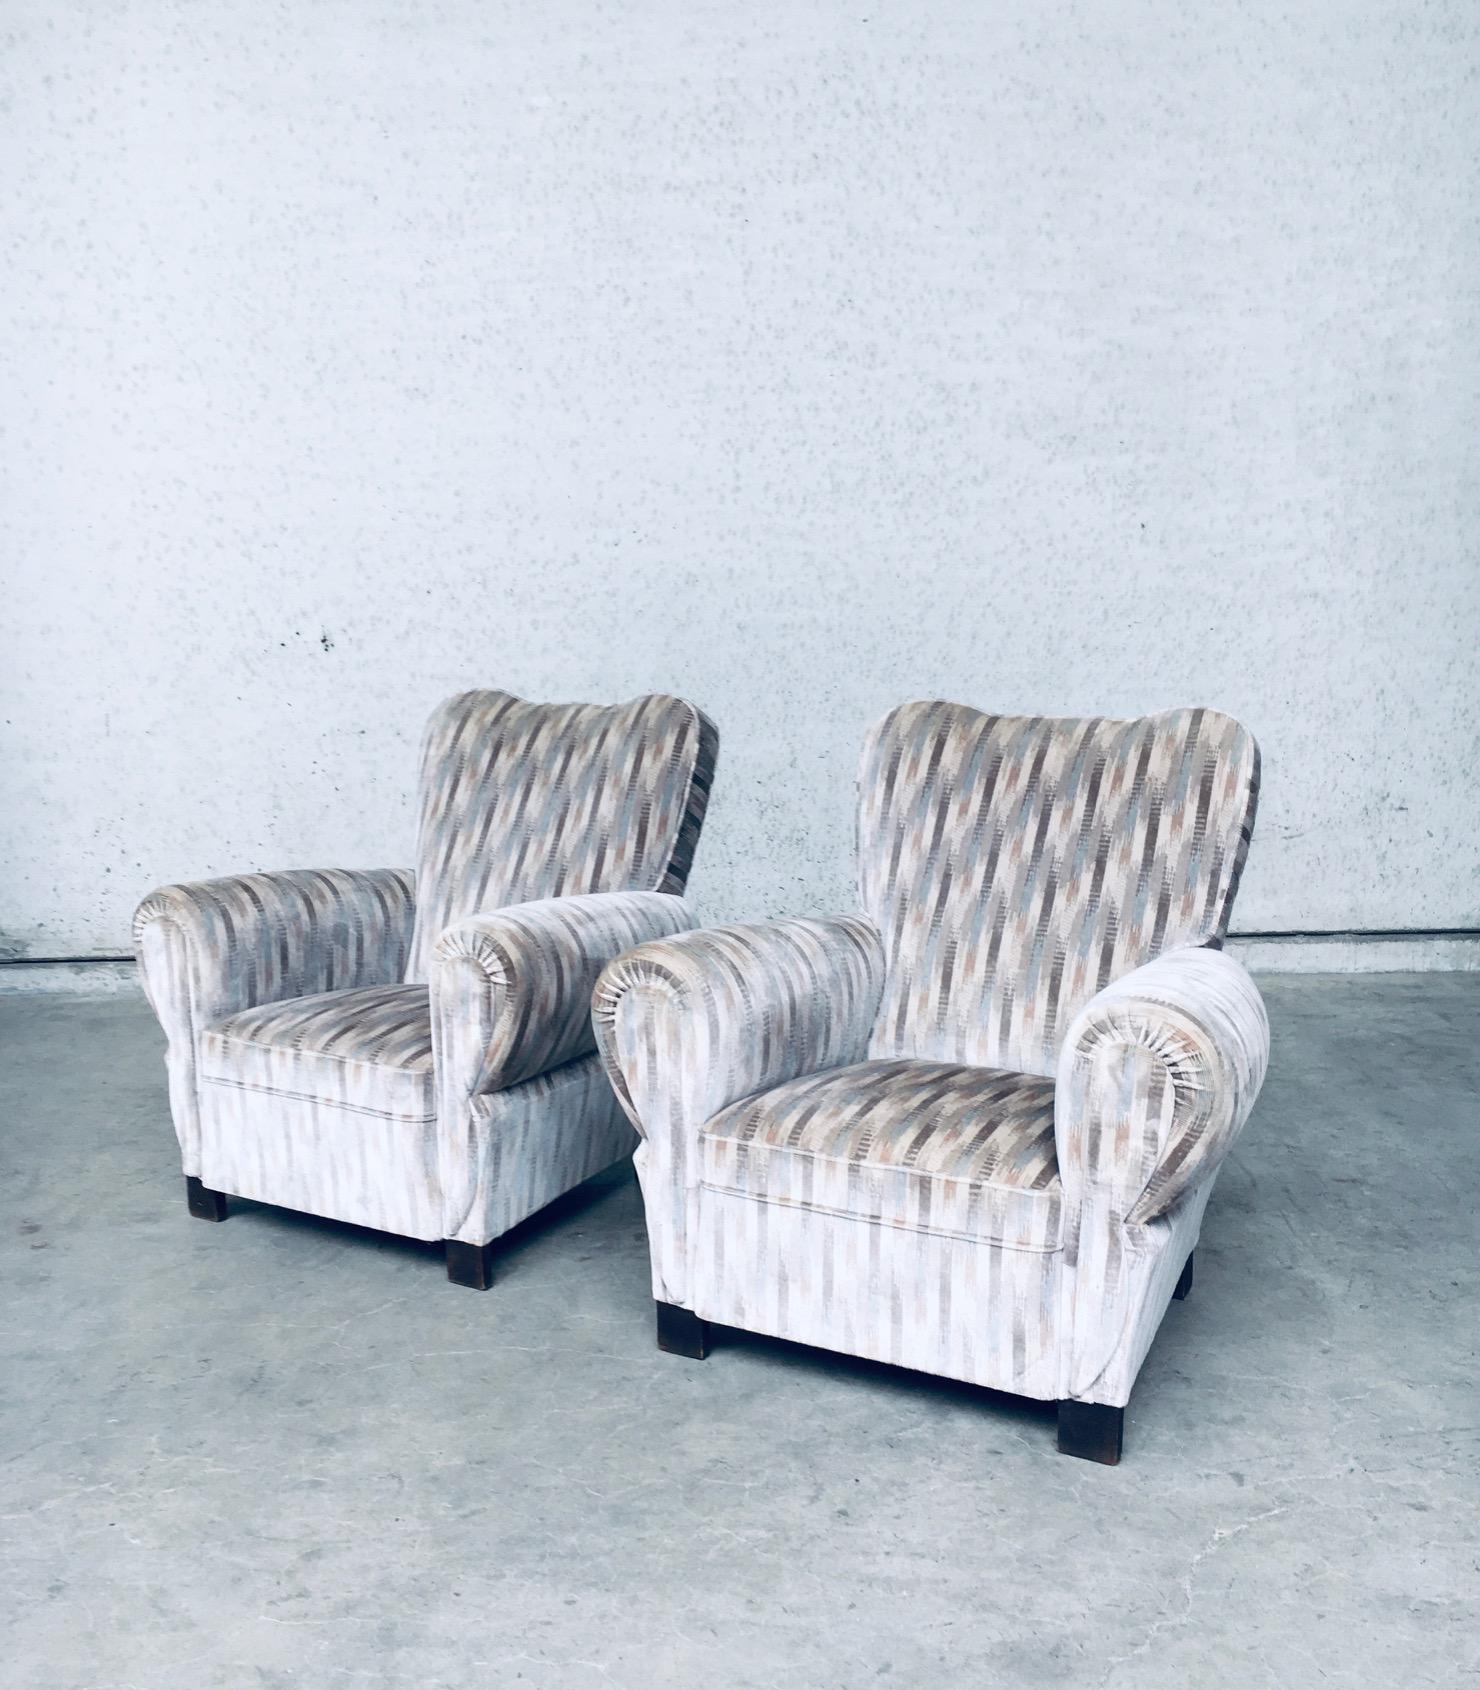 Vintage Art Deco Design Lounge Arm Chair set, made in Belgium 1940's. Beautiful shaped chairs with OP Art velvet fabric, which is probably not original and reupholstered somewhere in the 1970's / 80's. They are both in perfect condition. Each chair